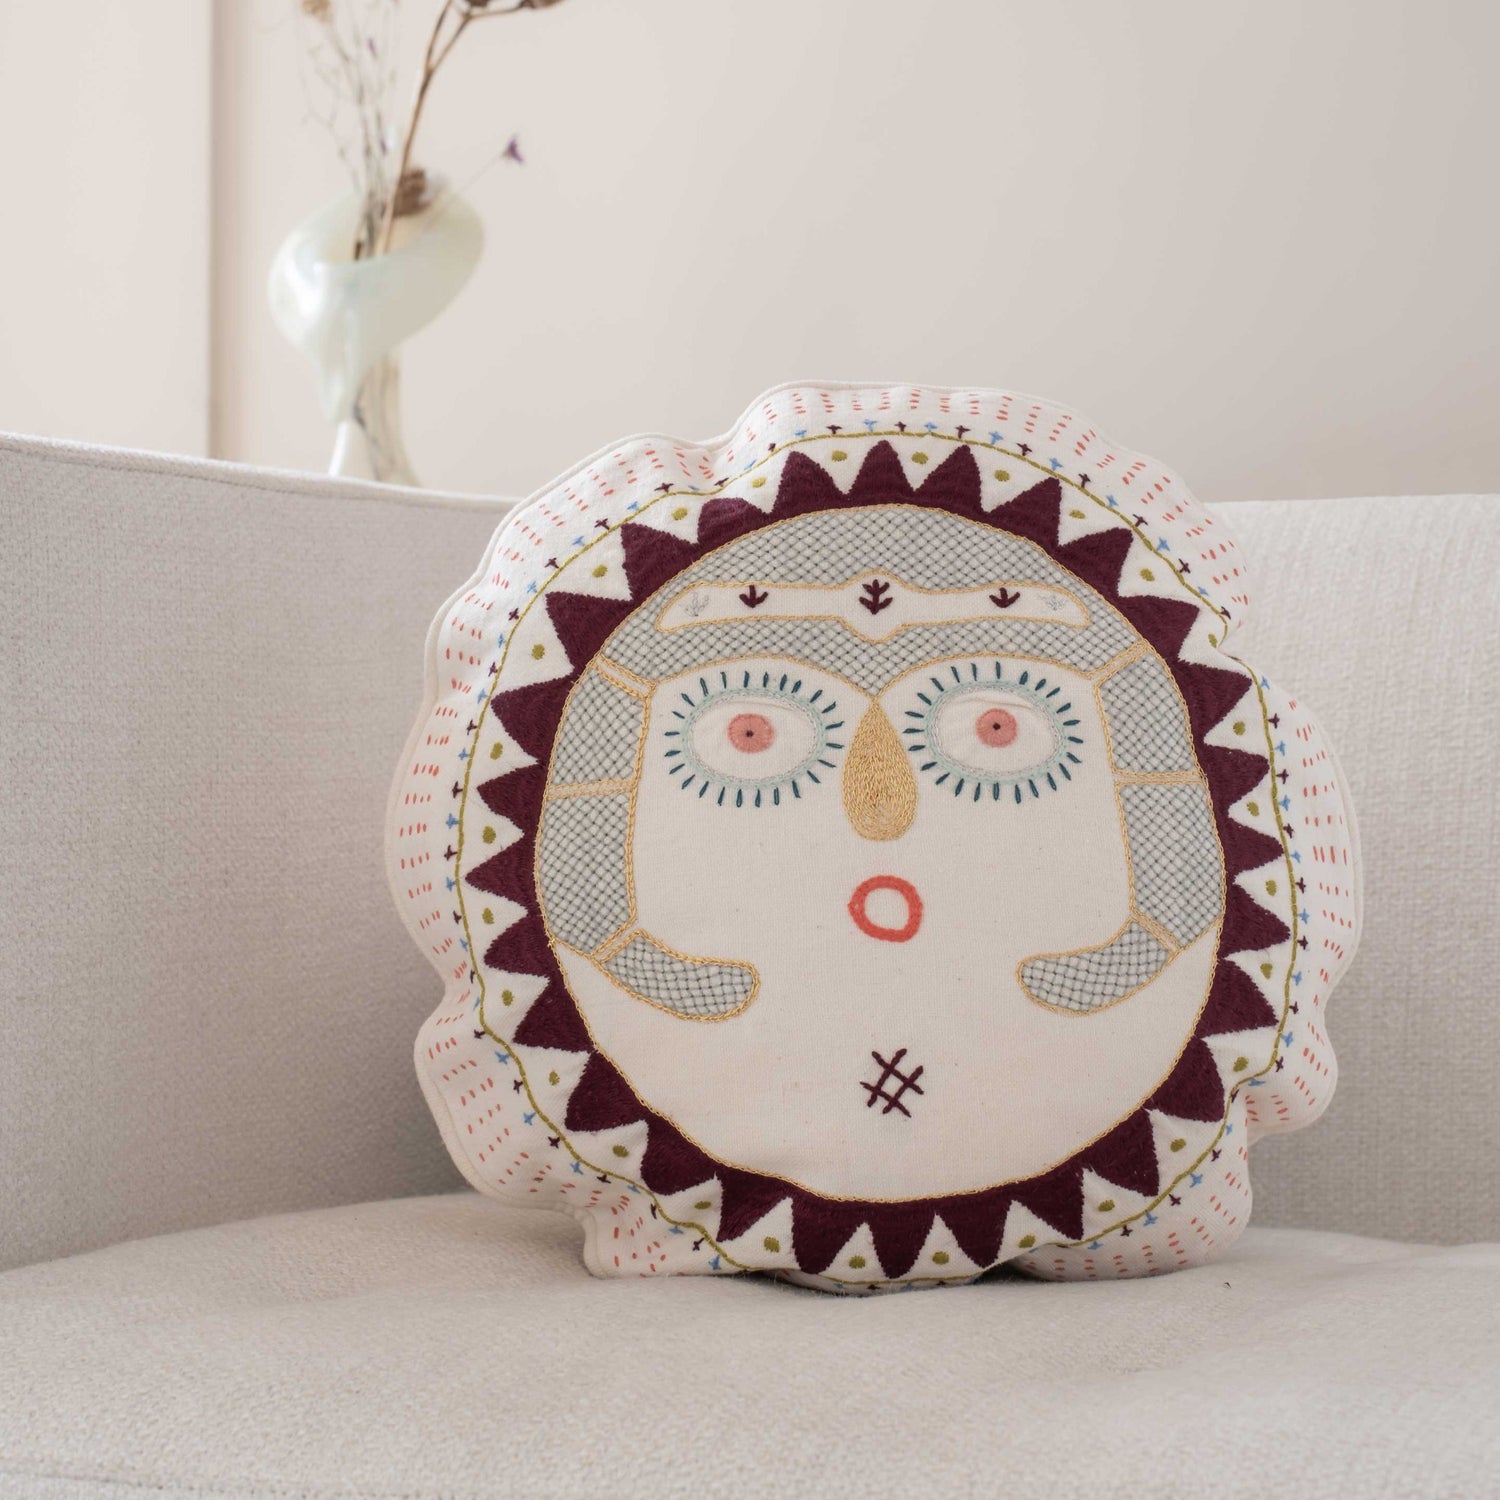 Beetroot round Sun Lady cushion placed on a sofa